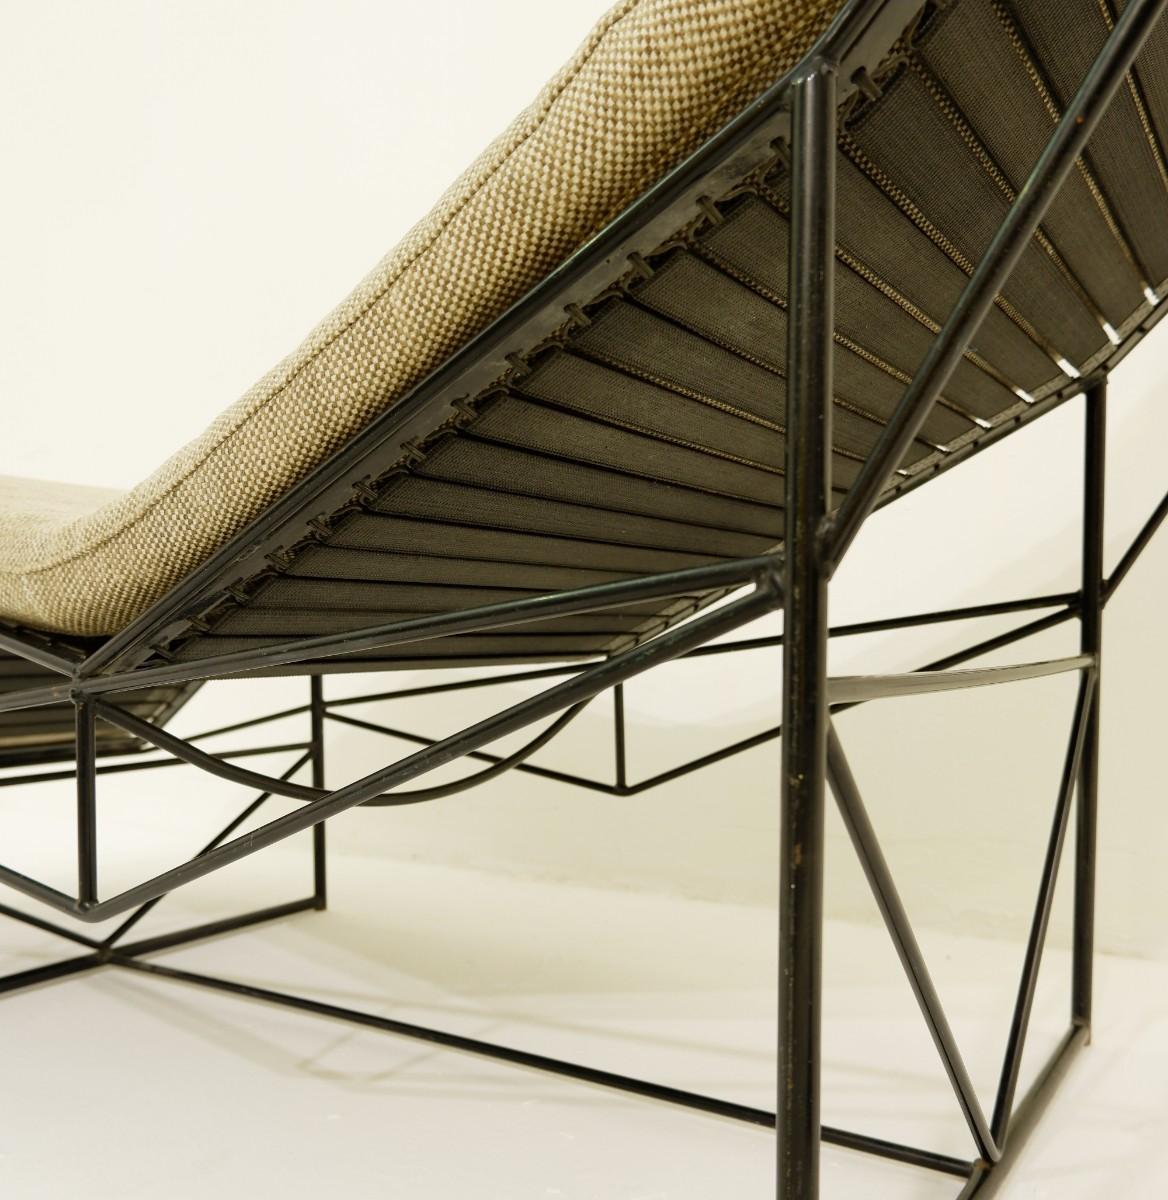 Metal Chaise Longue by Paolo Passerini for Uvet, 1985